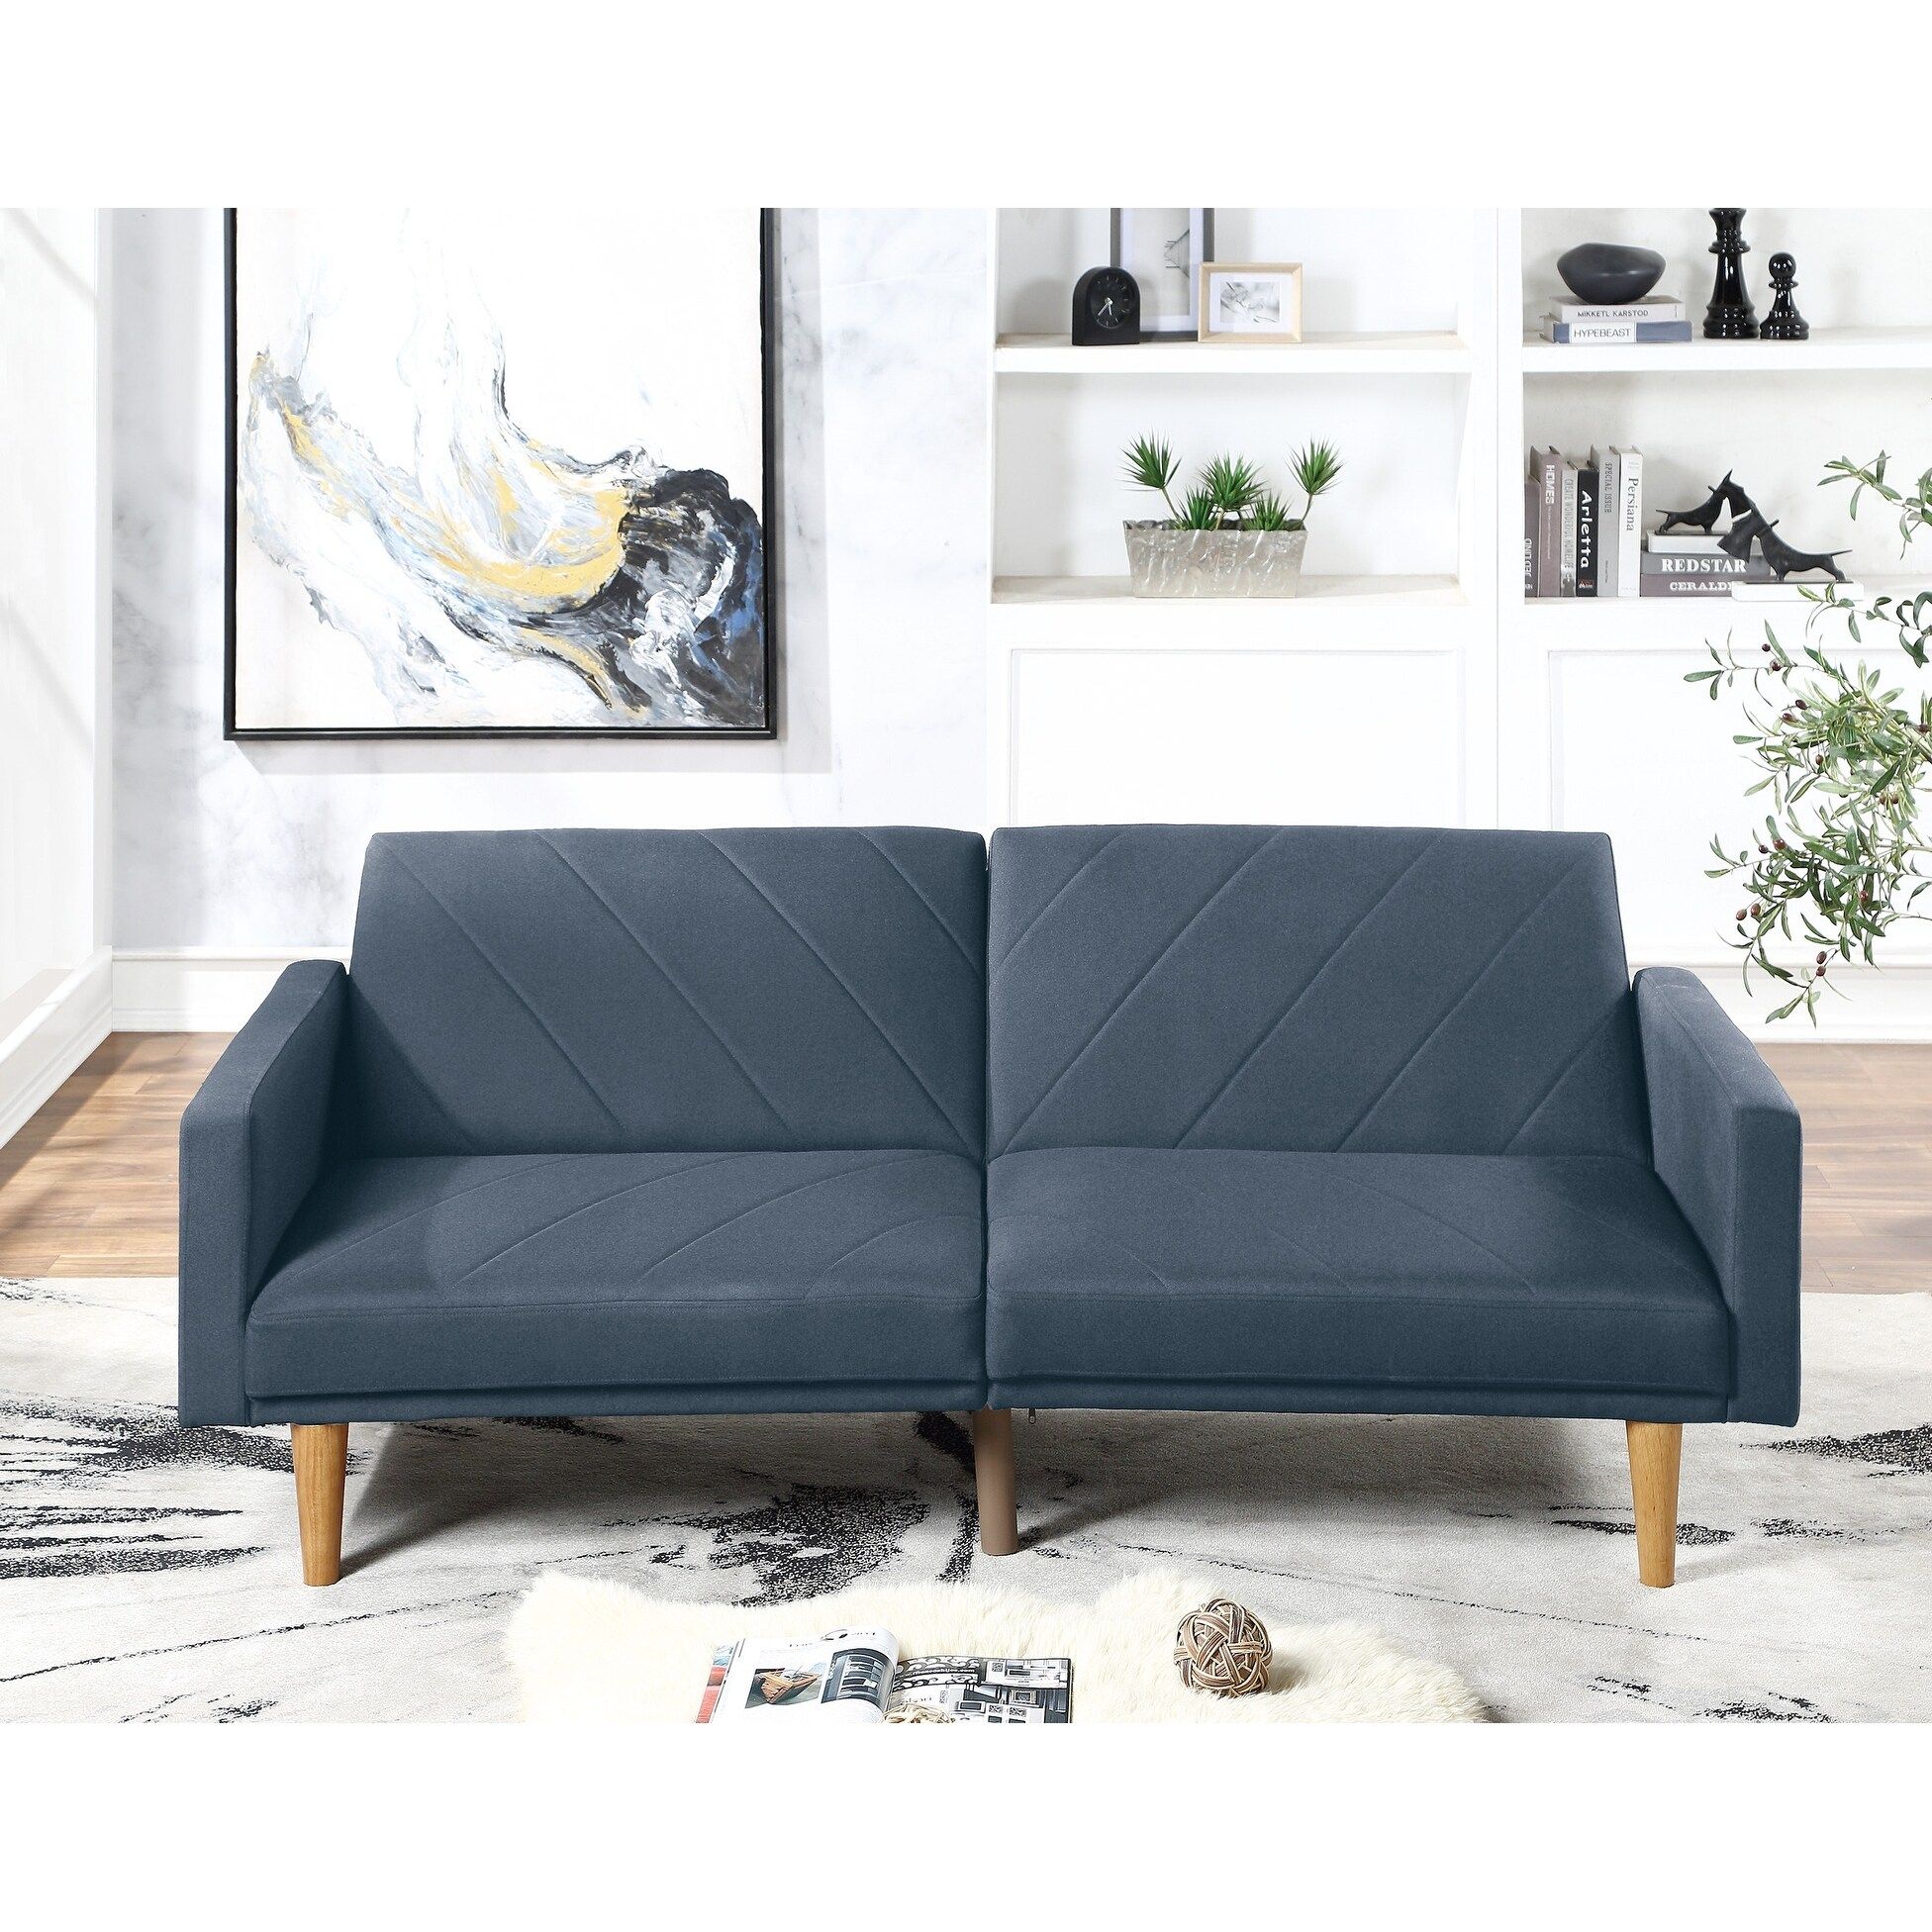 Modern Electric Look 1Pc Convertible Sofa Couch Navy Color Linen Like  Fabric Cushion Wooden Legs Living Room – Bed Bath & Beyond – 35204646 Inside Navy Sleeper Sofa Couches (View 3 of 15)